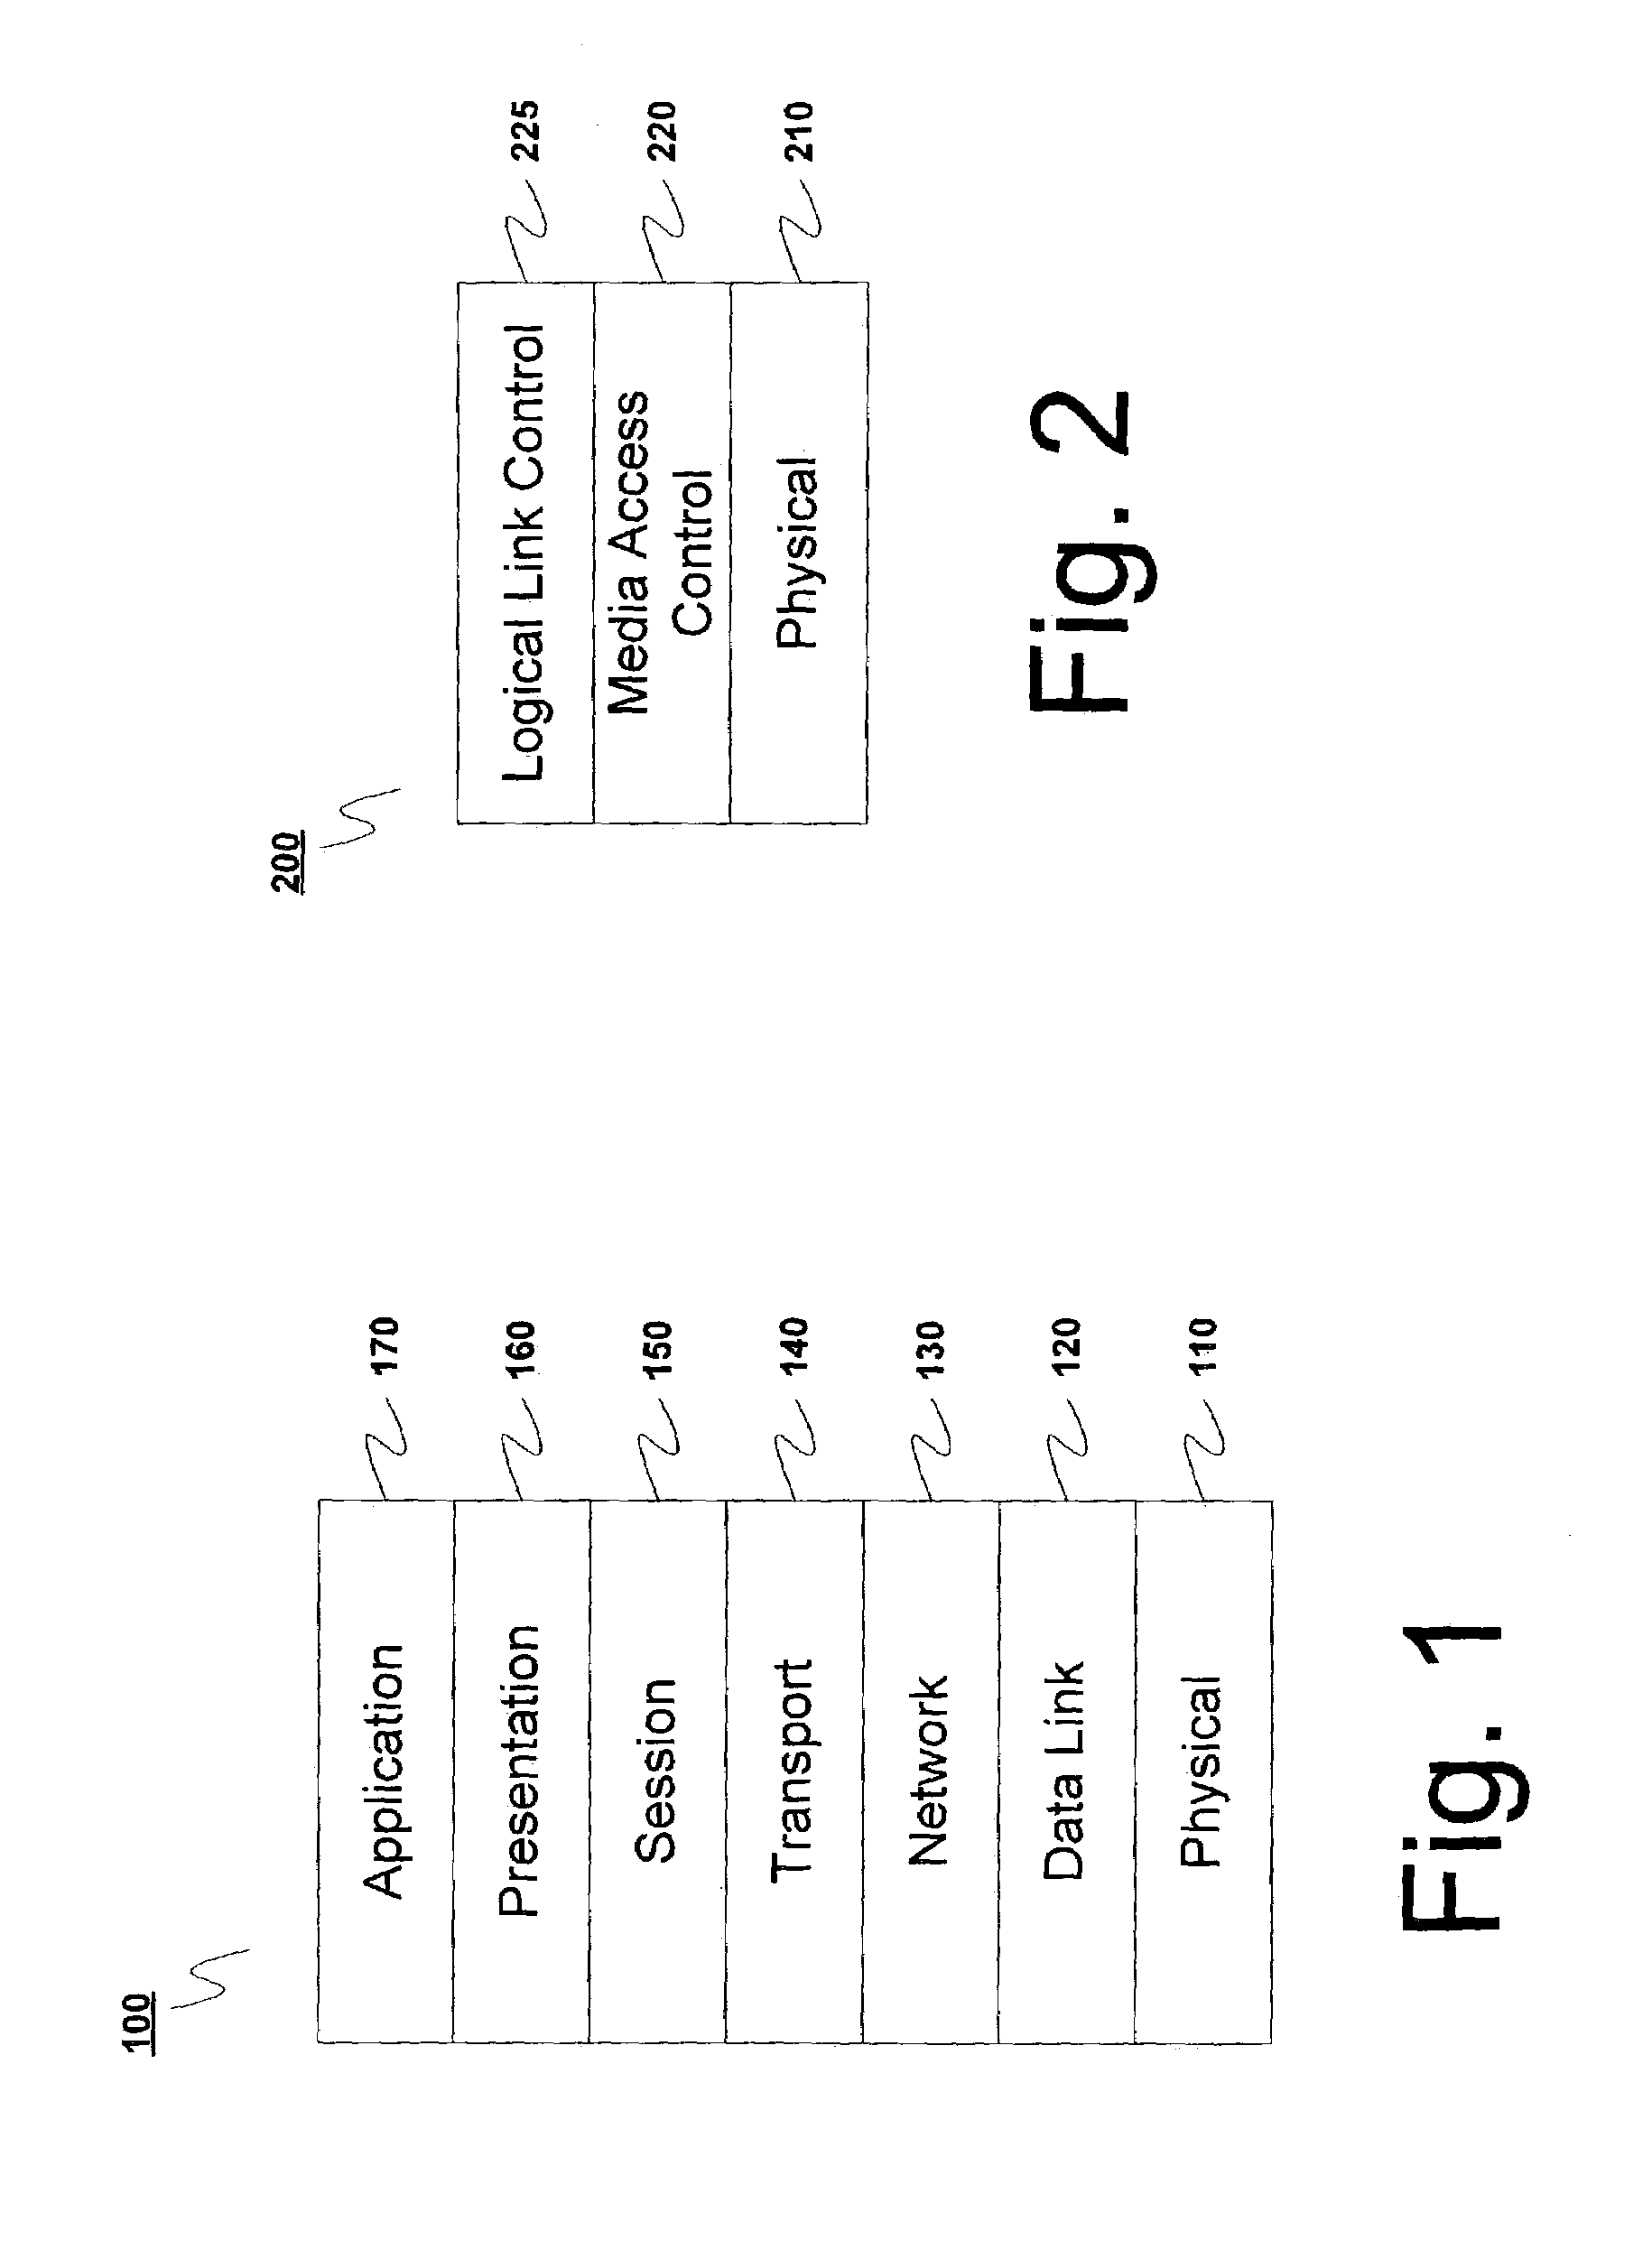 Method and system for performing ranging functions in an ultrawide bandwidth system